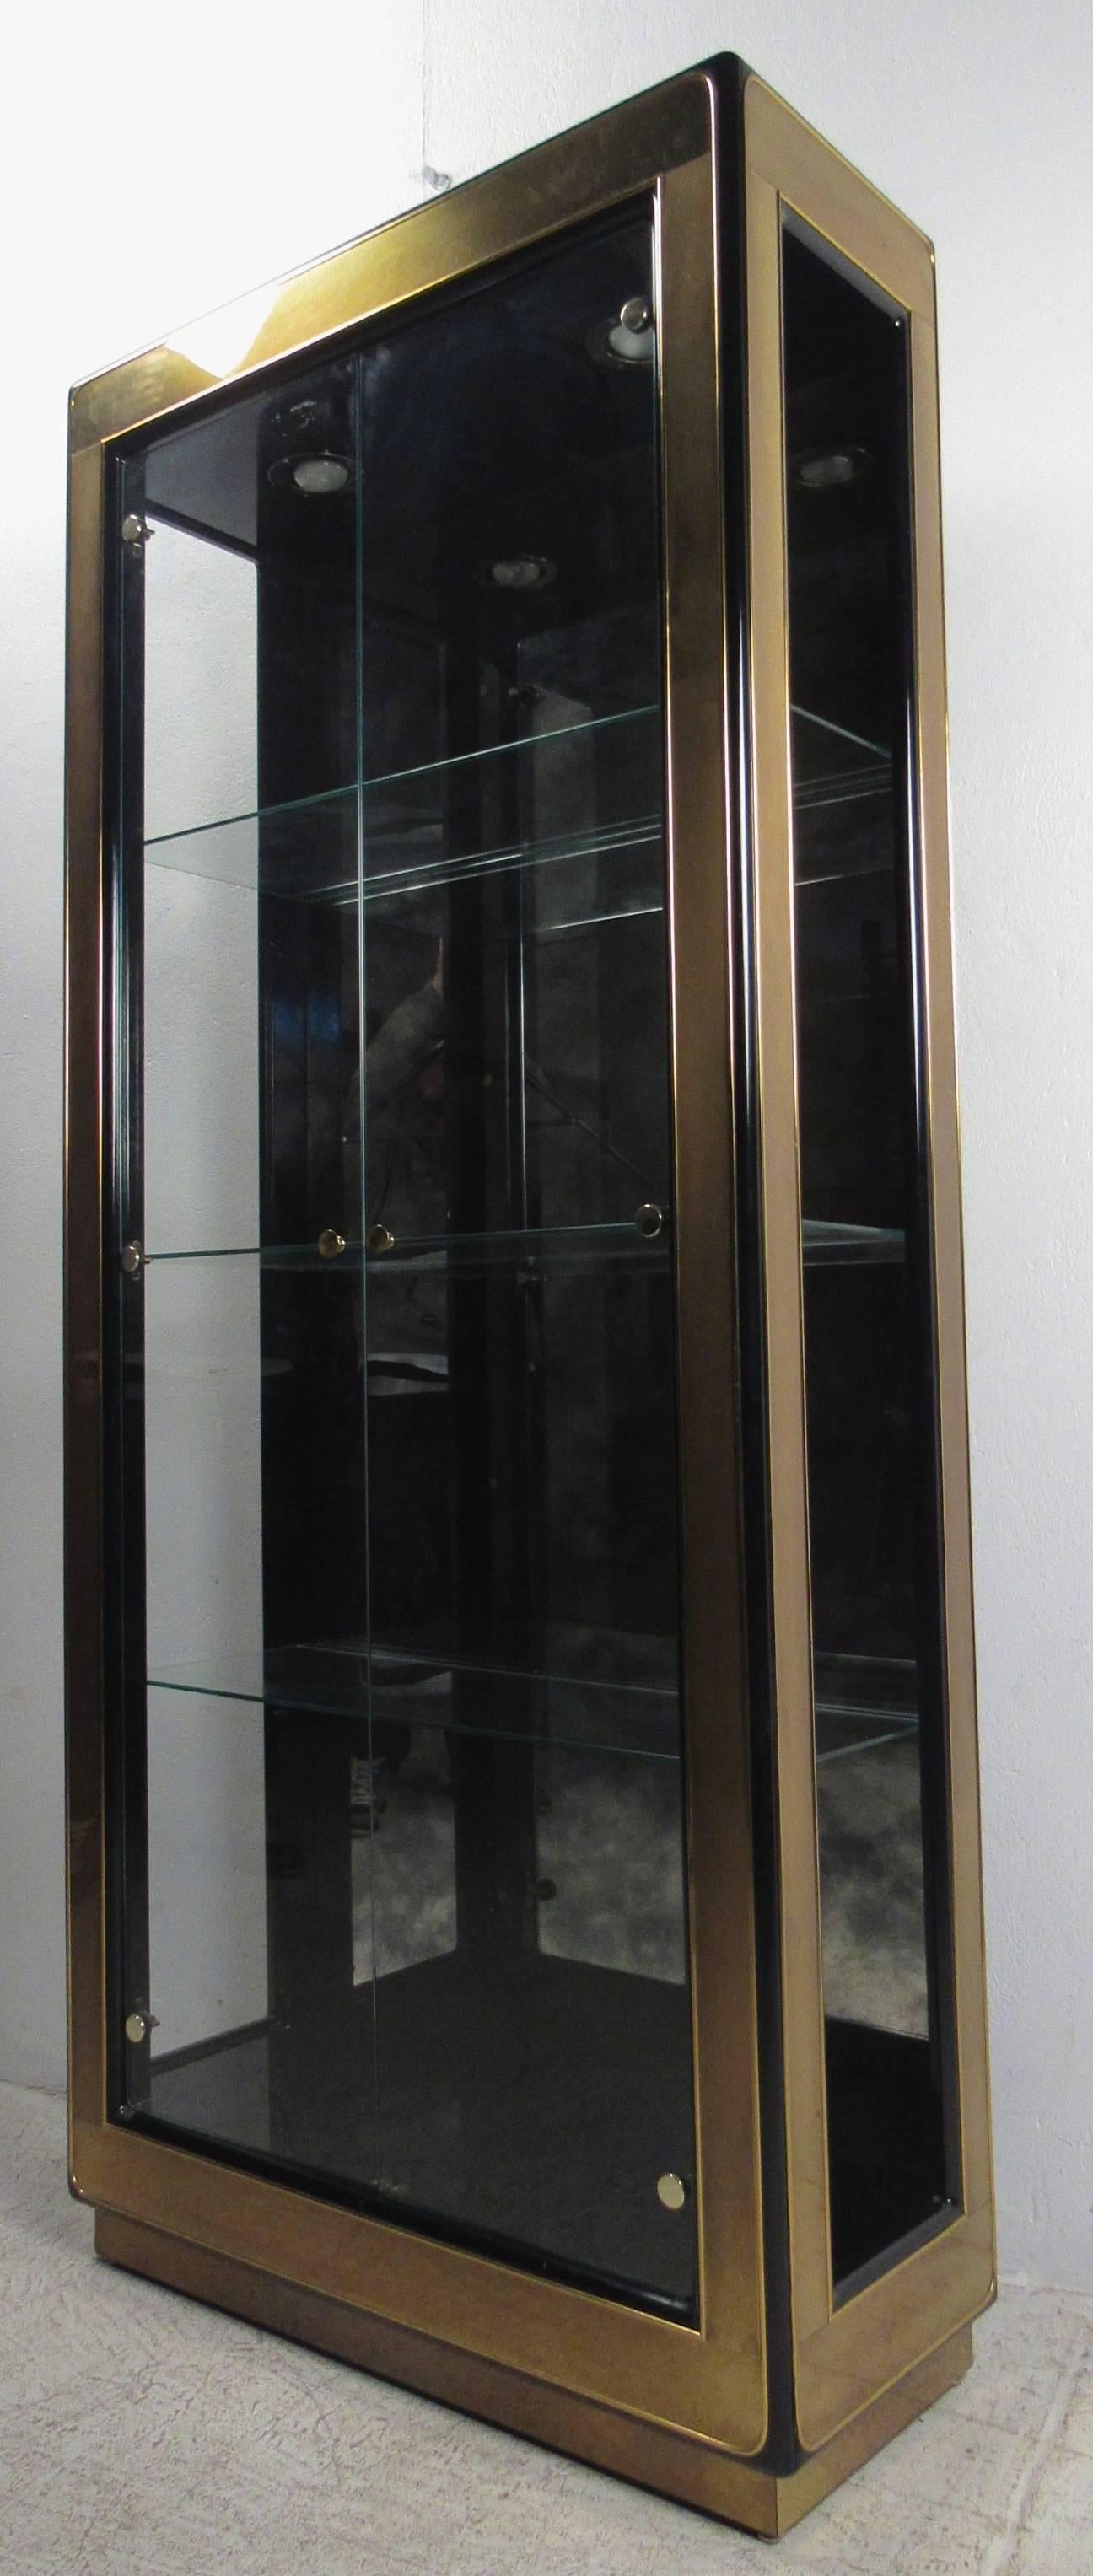 Vintage-modern display cabinet featuring glass shelving and brass trim, manufactured by Mastercraft. Stylish brass display cabinet makes a striking addition to home or shop display. Please confirm item location NY or NJ with dealer.